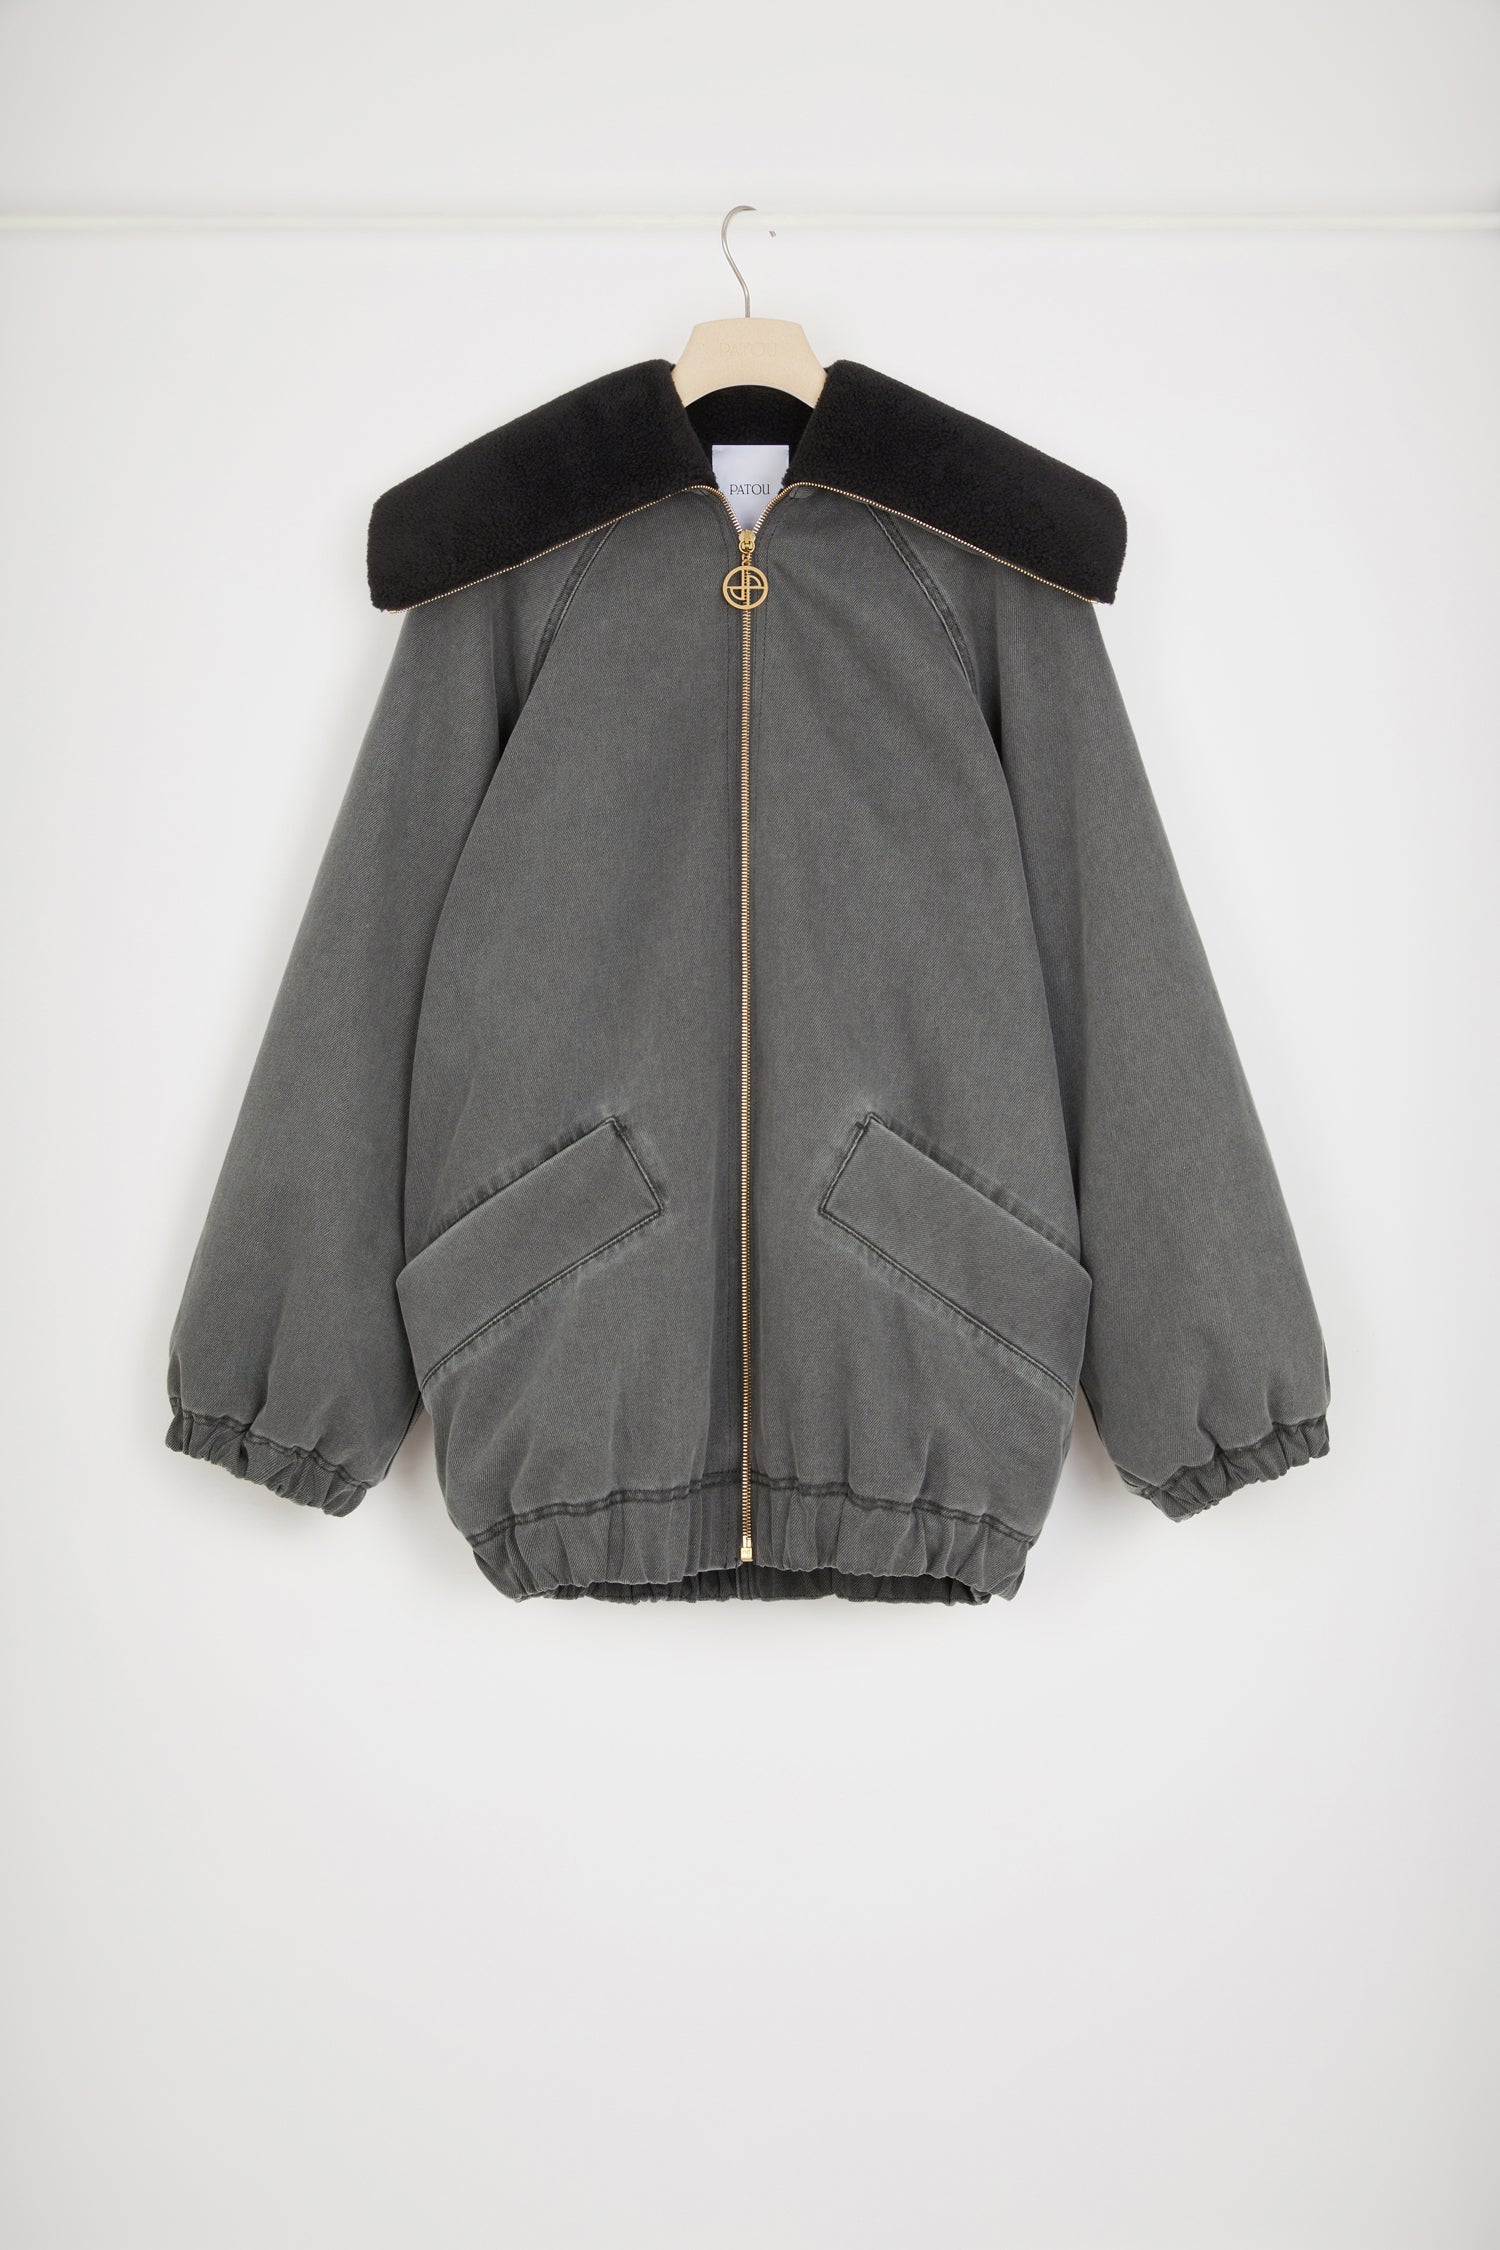 Patou | Oversized jacket in organic cotton denim and faux shearling